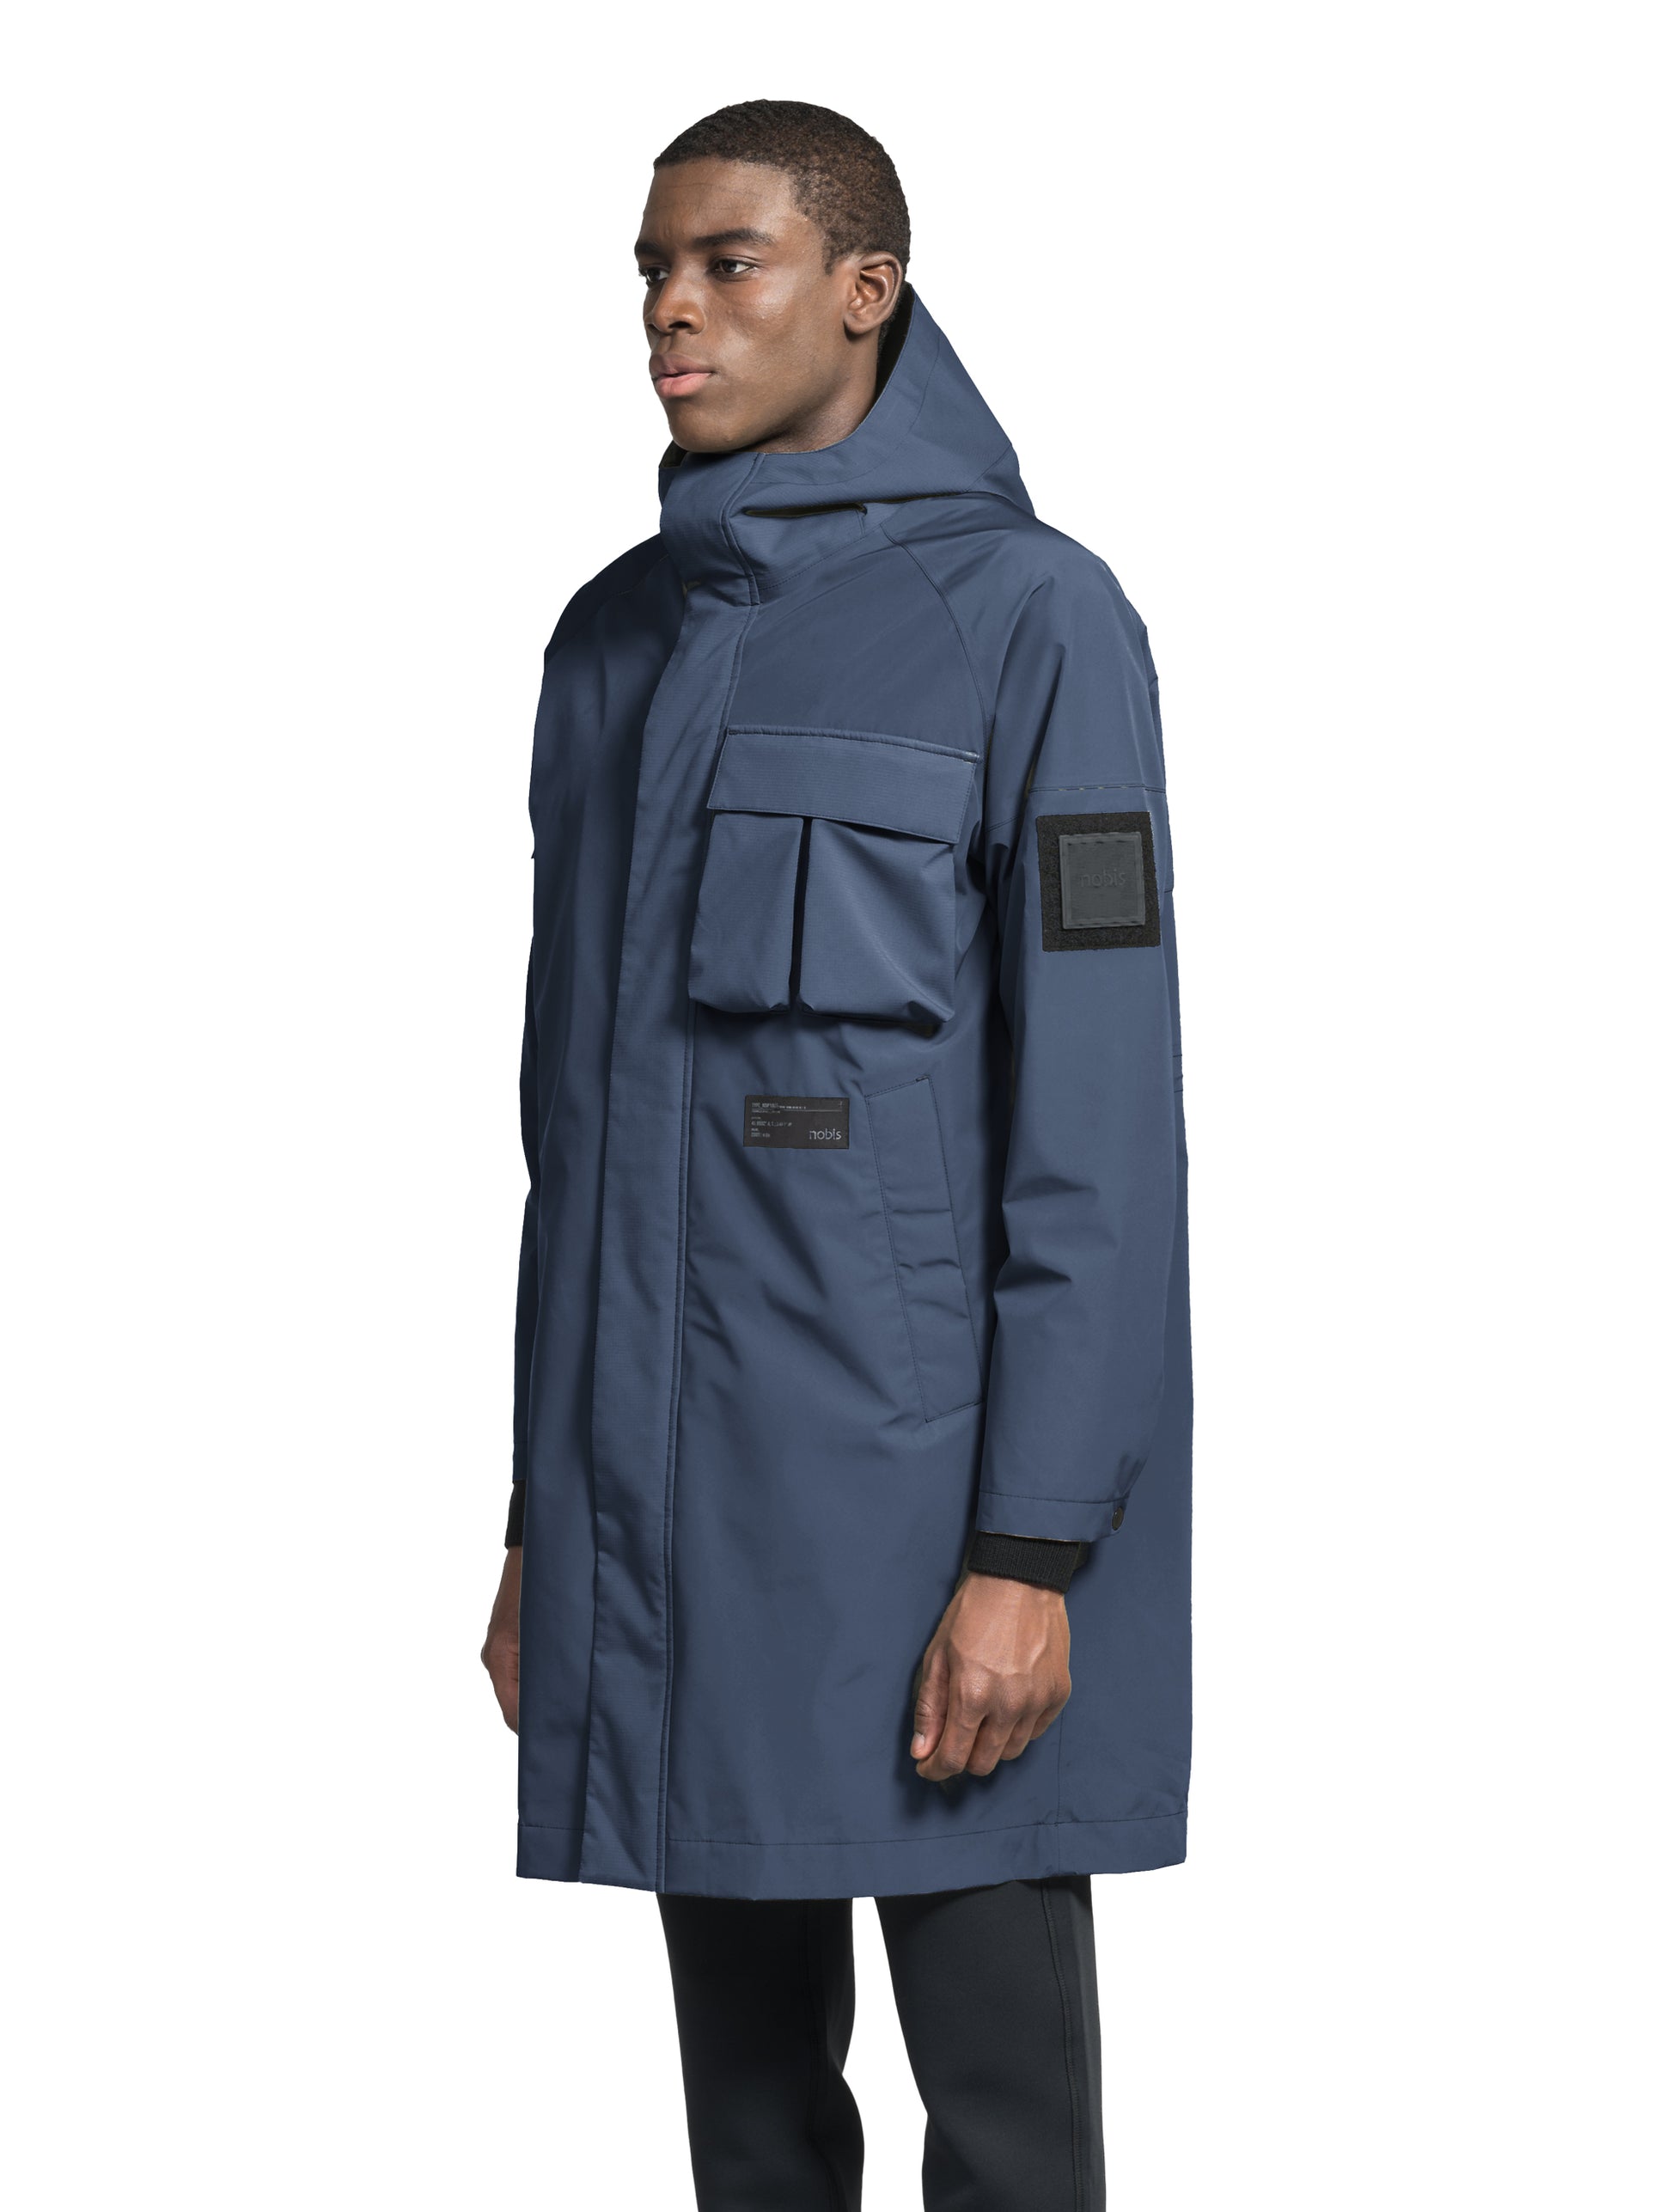 Wylder Men's Performance Rain Jacket in knee length, premium 3-ply Micro Denier and stretch ripstop fabrication, non-removable hood with reflective piping and adjustable draw cord, split utility chest pocket with magnetic flap closure, single welt pockets with magnetic closure at waist, back yoke with mesh ventilation, snap button wind flap, two-way branded zipper at centre front, telescopic sleeves with elasticized cuffs, interior draw cord at waist, in Marine